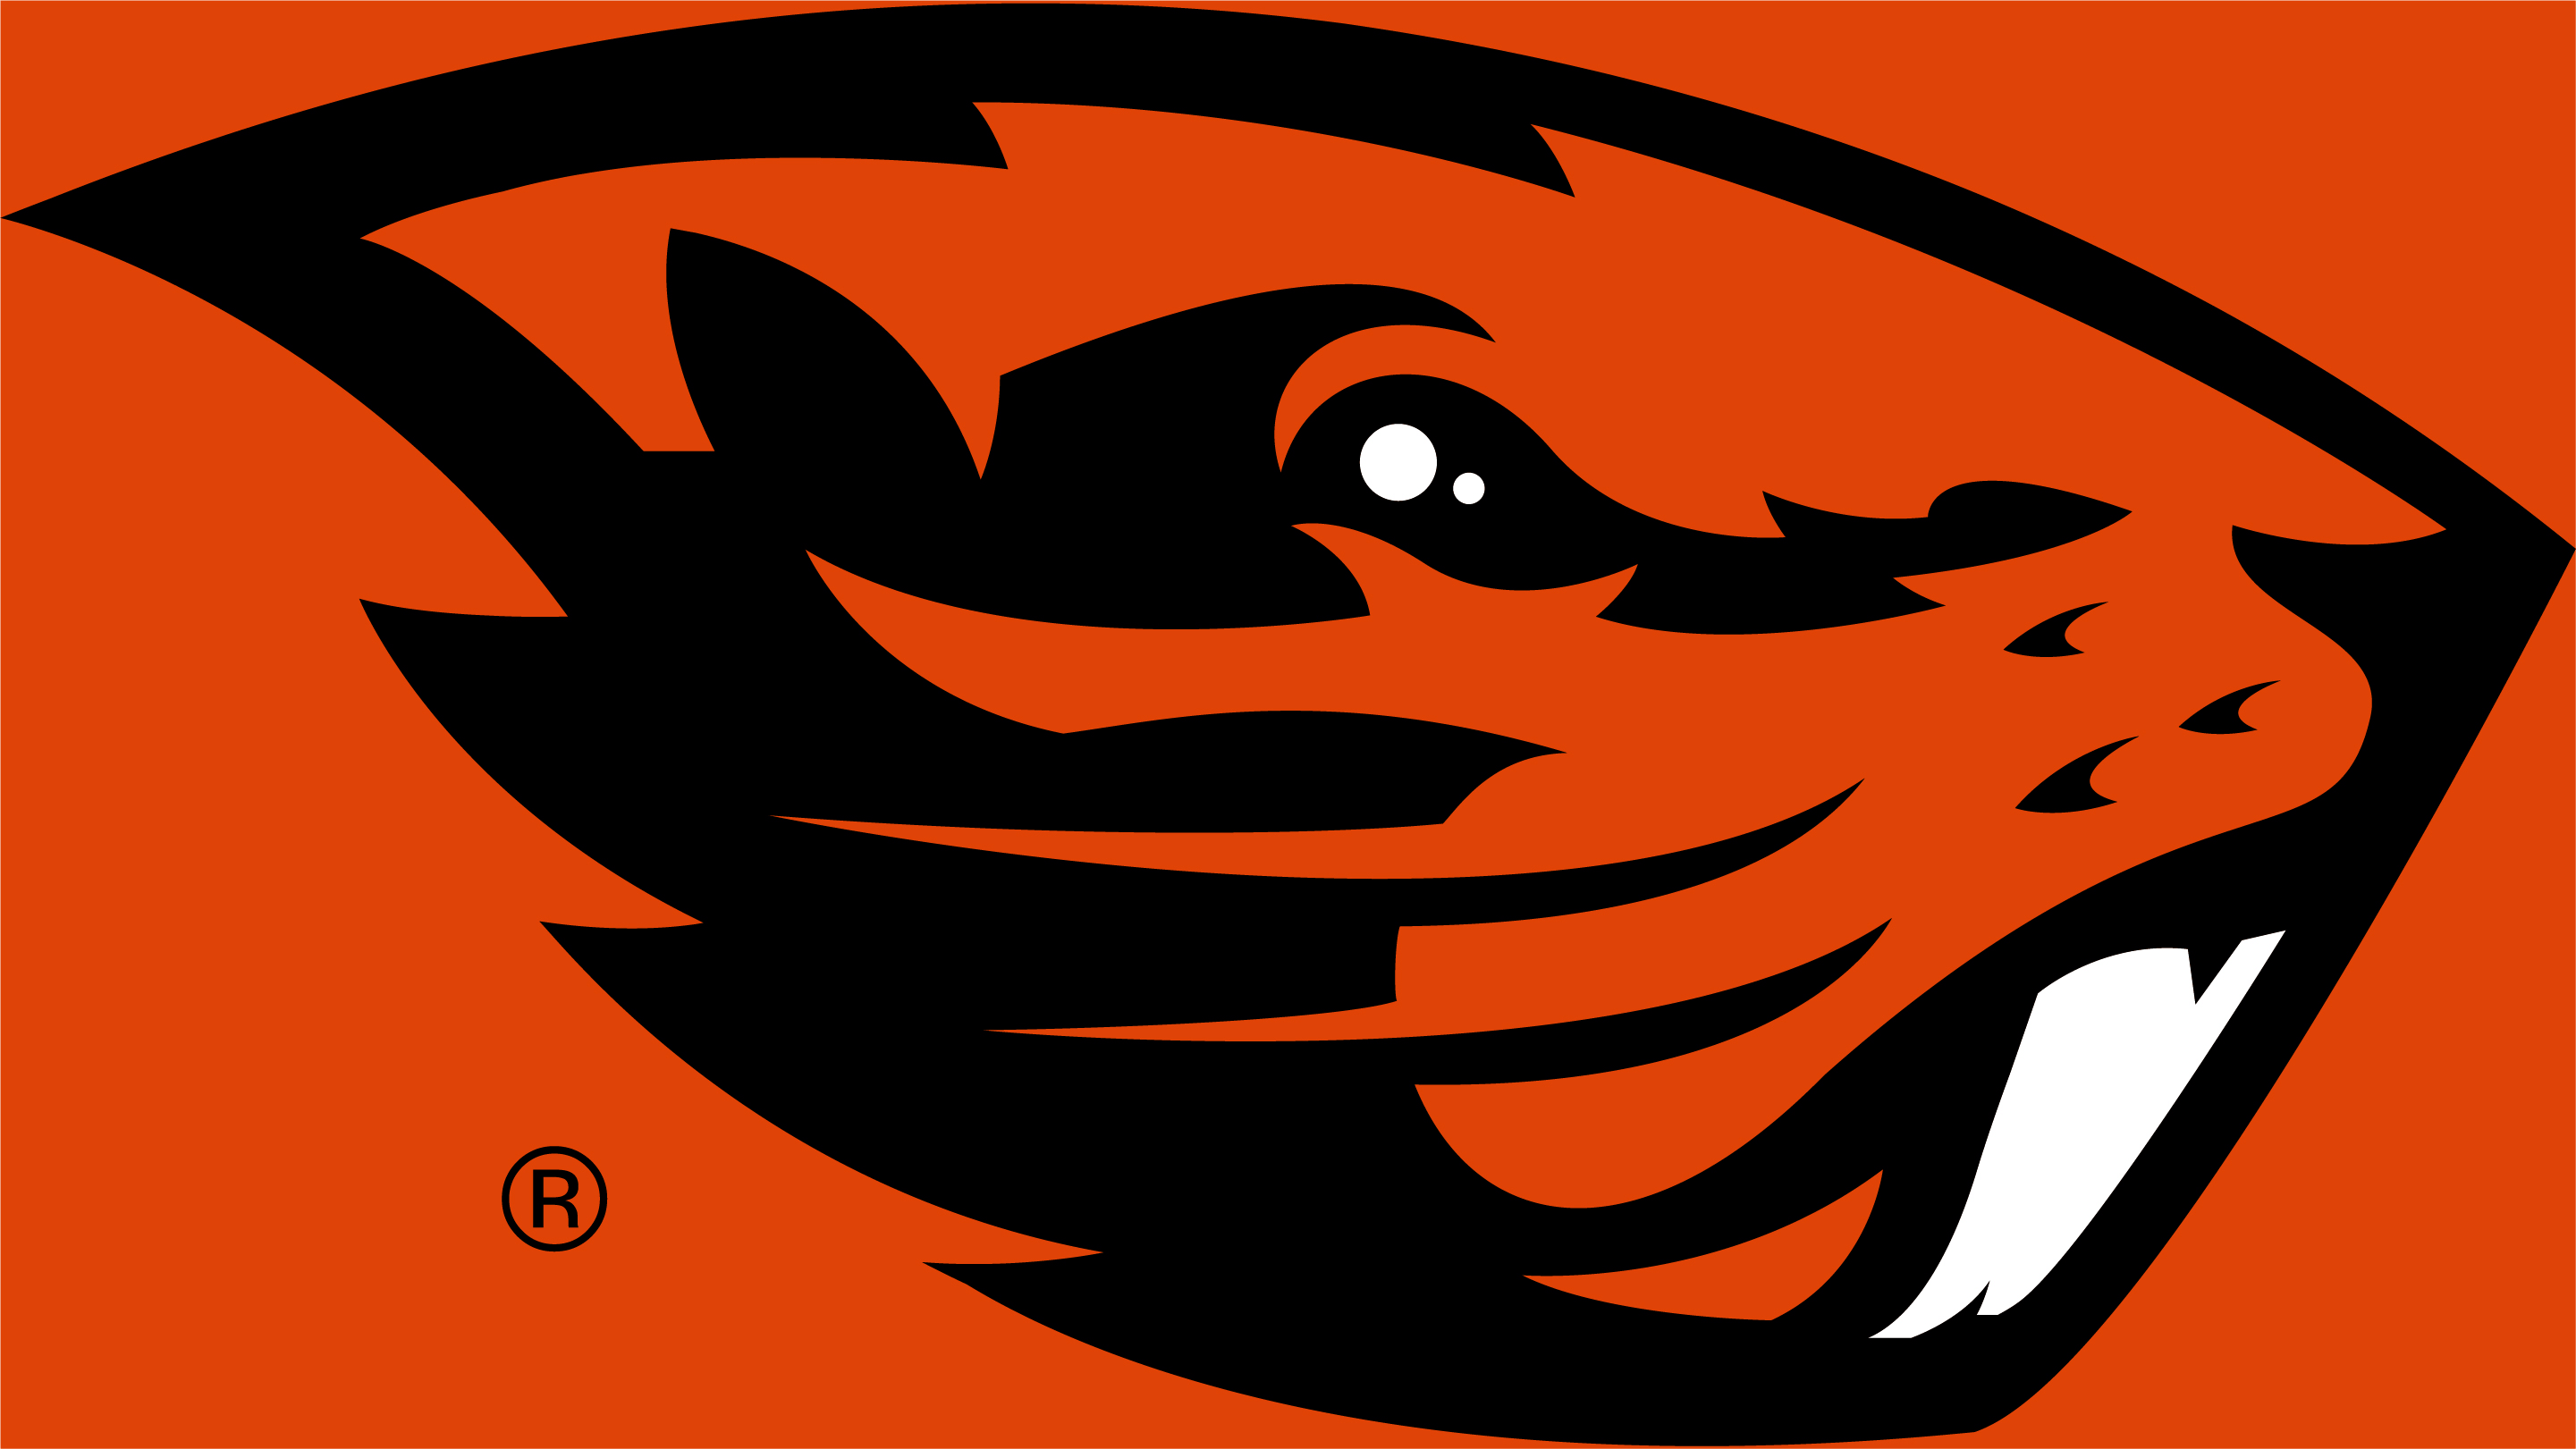 Oregon State Coolers